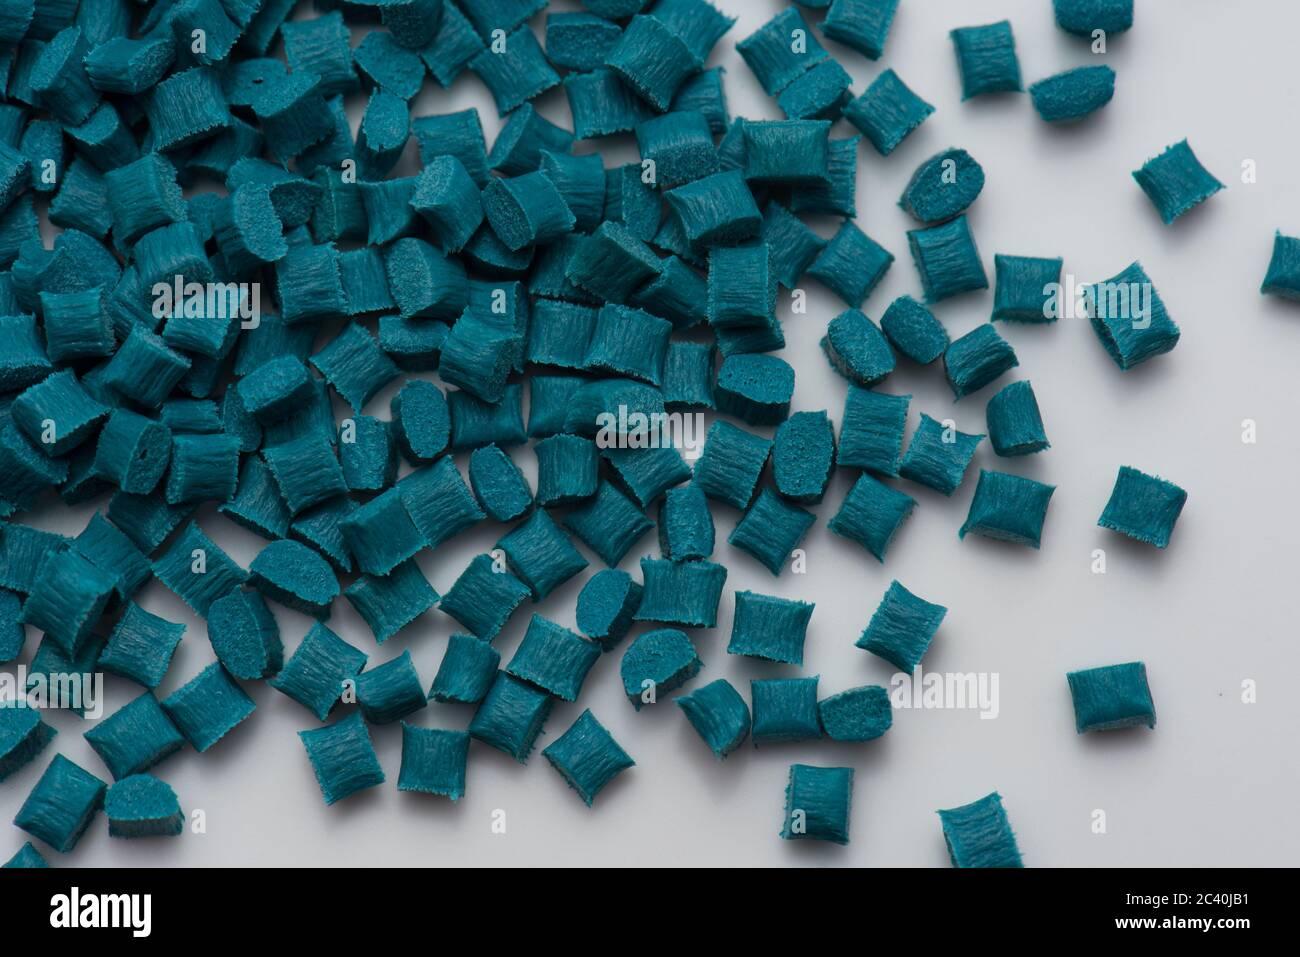 navy blue / turquoise plastic polymer resins with glass-fibre Stock Photo